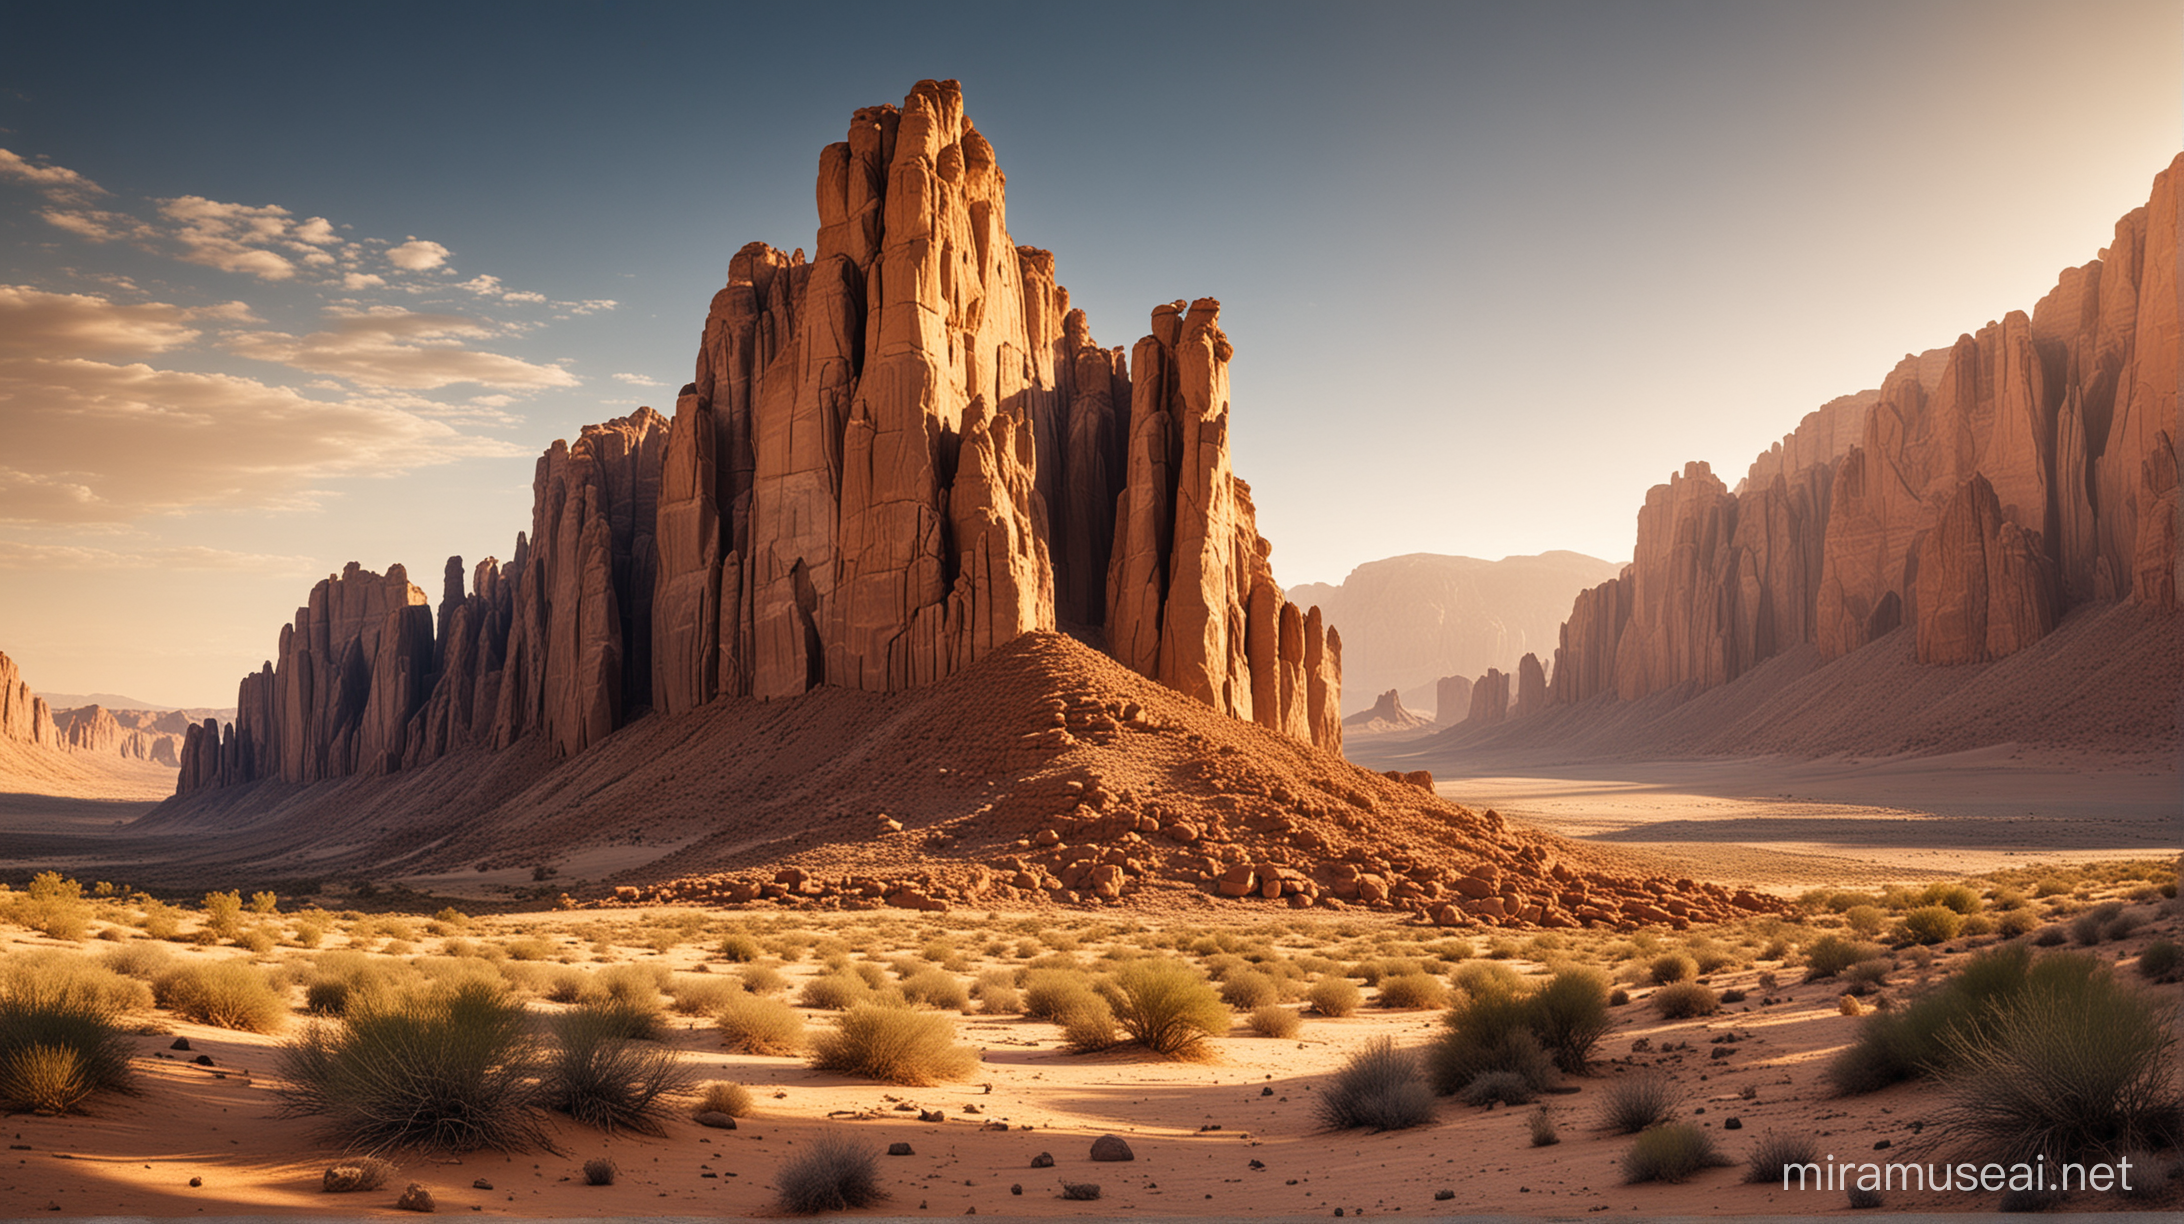 Desert Landscape with Towering Rock Cliffs: Explore the Majestic Beauty of a Desert Landscape, Where Towering Rock Cliffs Rise Amidst the Barren Terrain. Using Aesthetic and Natural Photography Techniques, Capture the Serene Grandeur of the Desert, Immersed in the Warm Glow of the Sun. This Stunning Scene Invites You to Witness Nature's Timeless Artistry, Where Every Stone and Every Ray of Light Tells a Story of Endless Wonder and Exploration